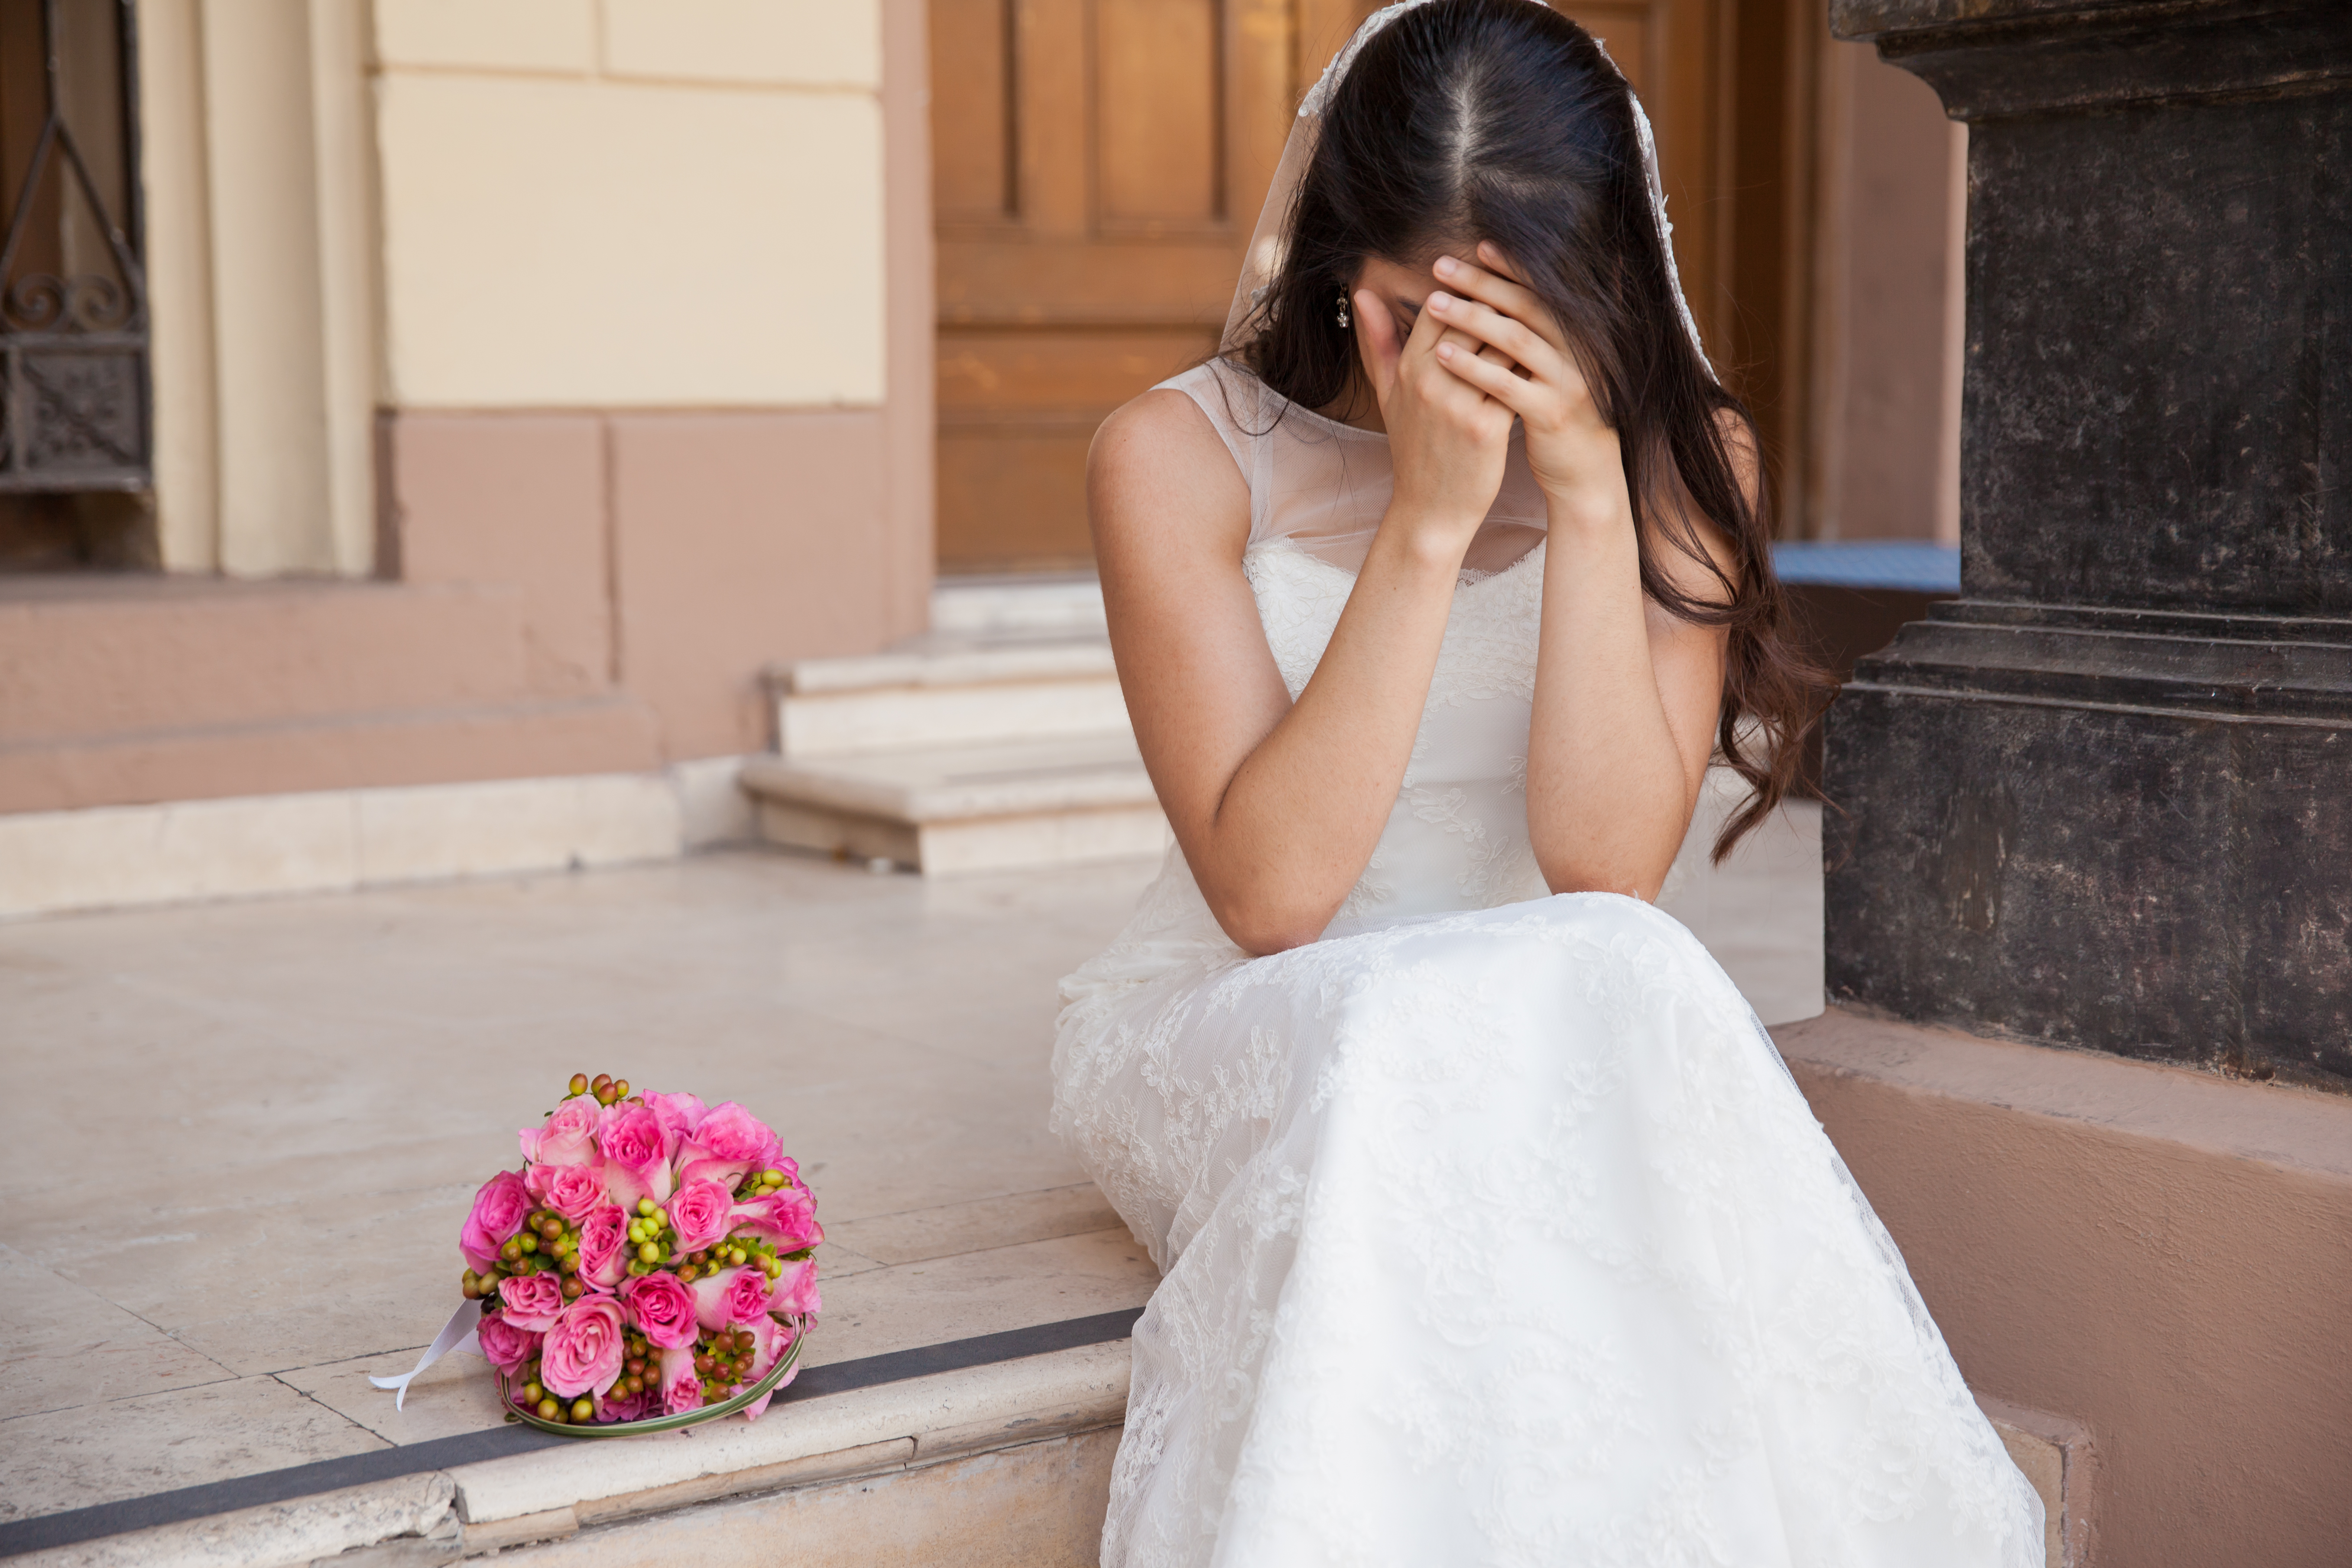 An upset bride | Source: Getty Images